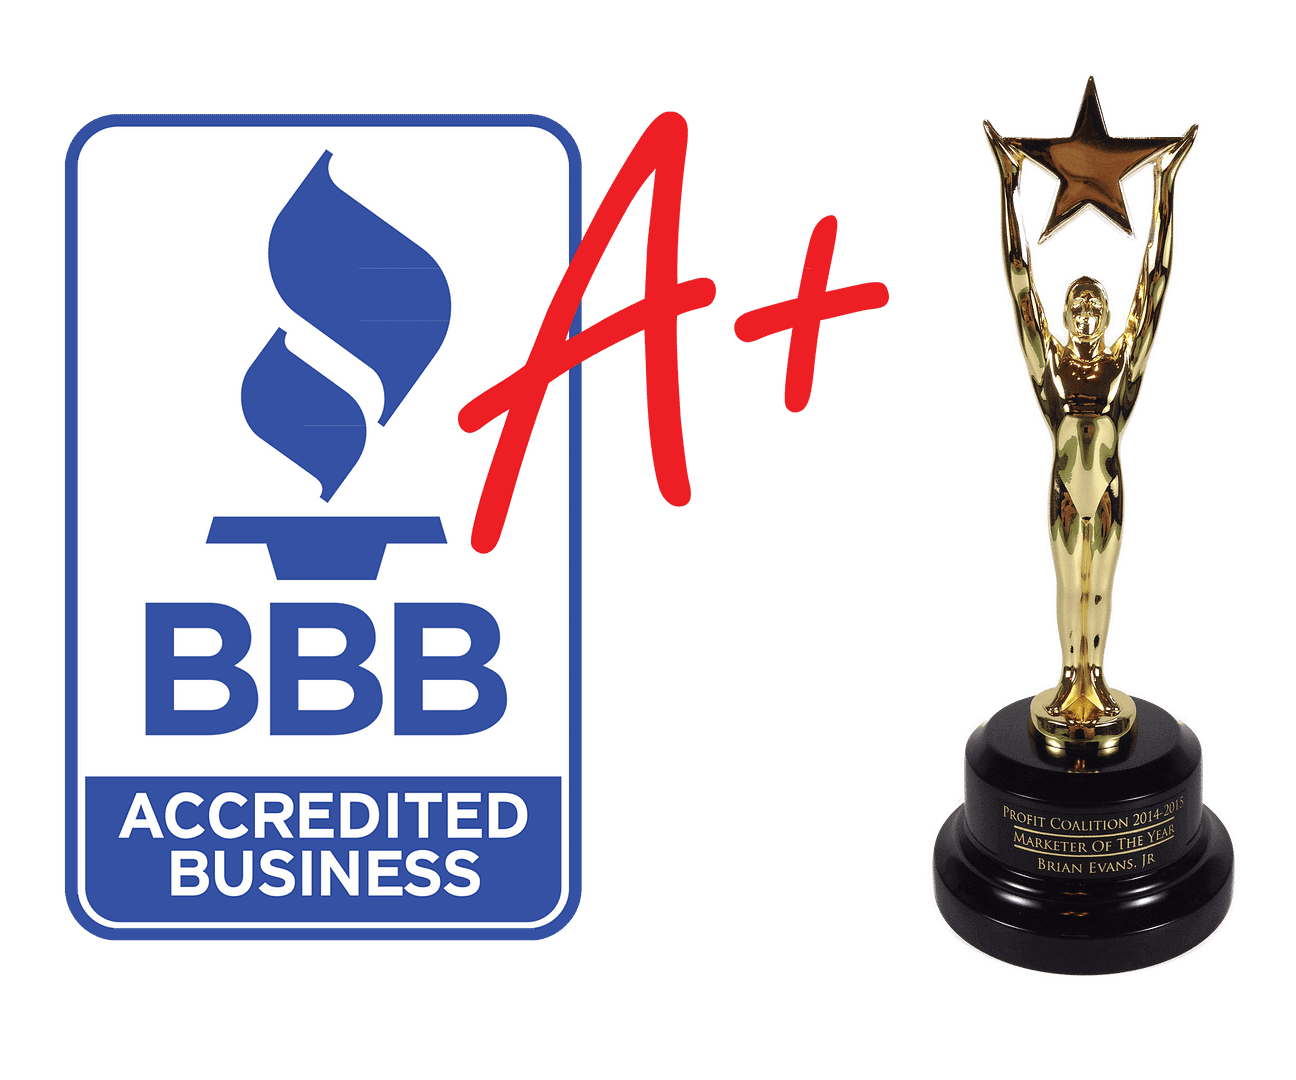 bbb-logo and trophy of BT Web Group